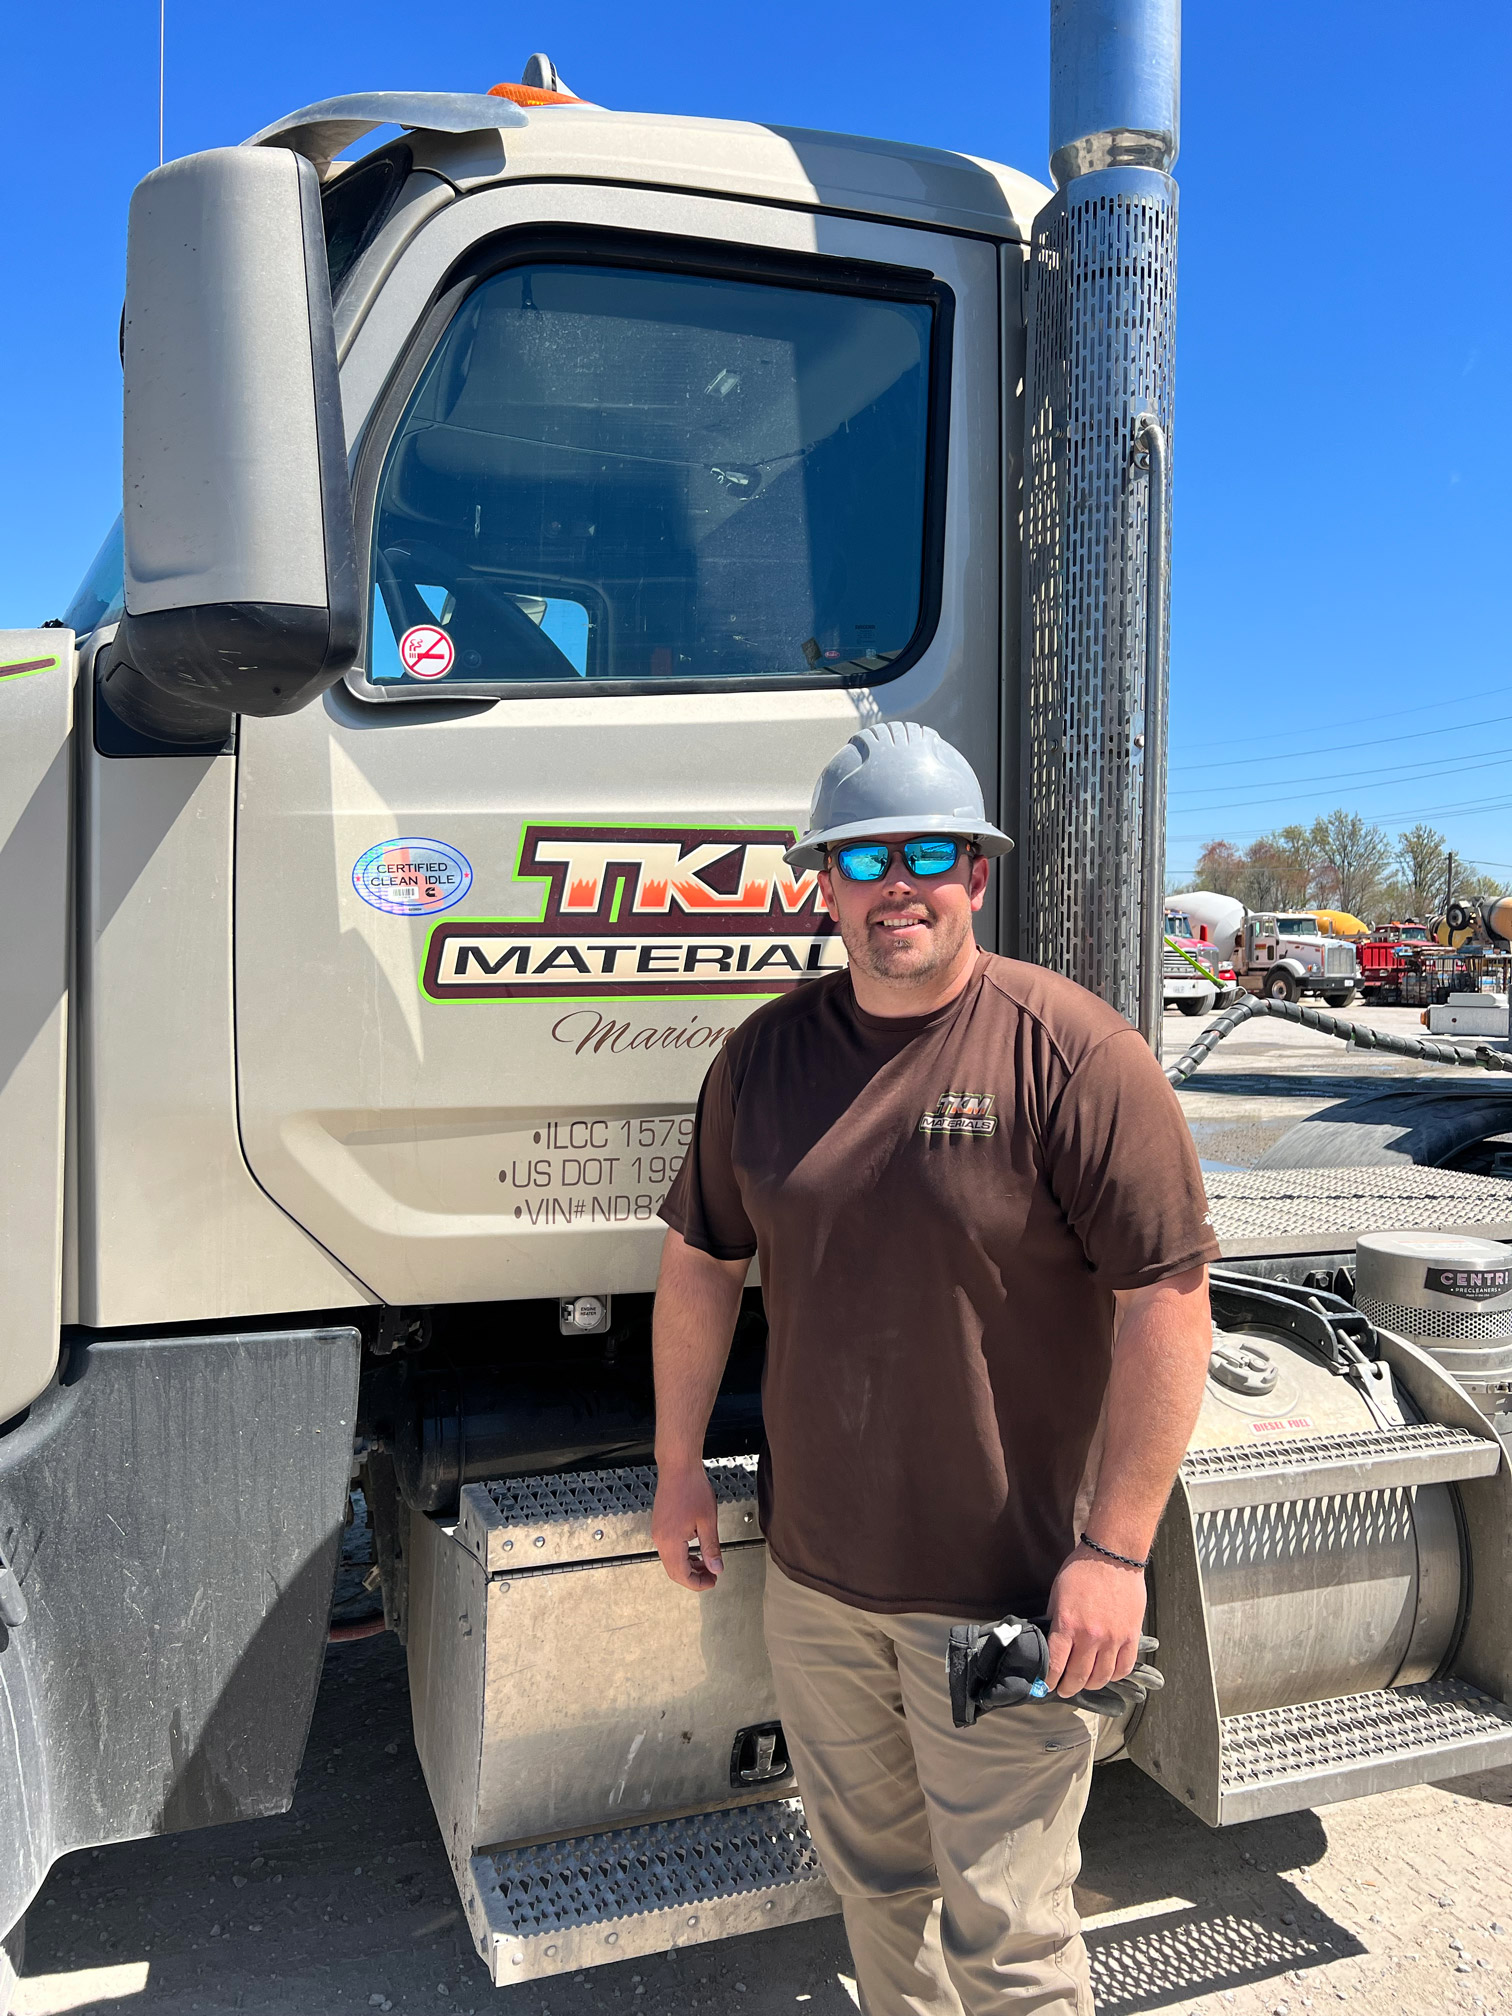 tkm materials truck driver standing by vehicle at job site